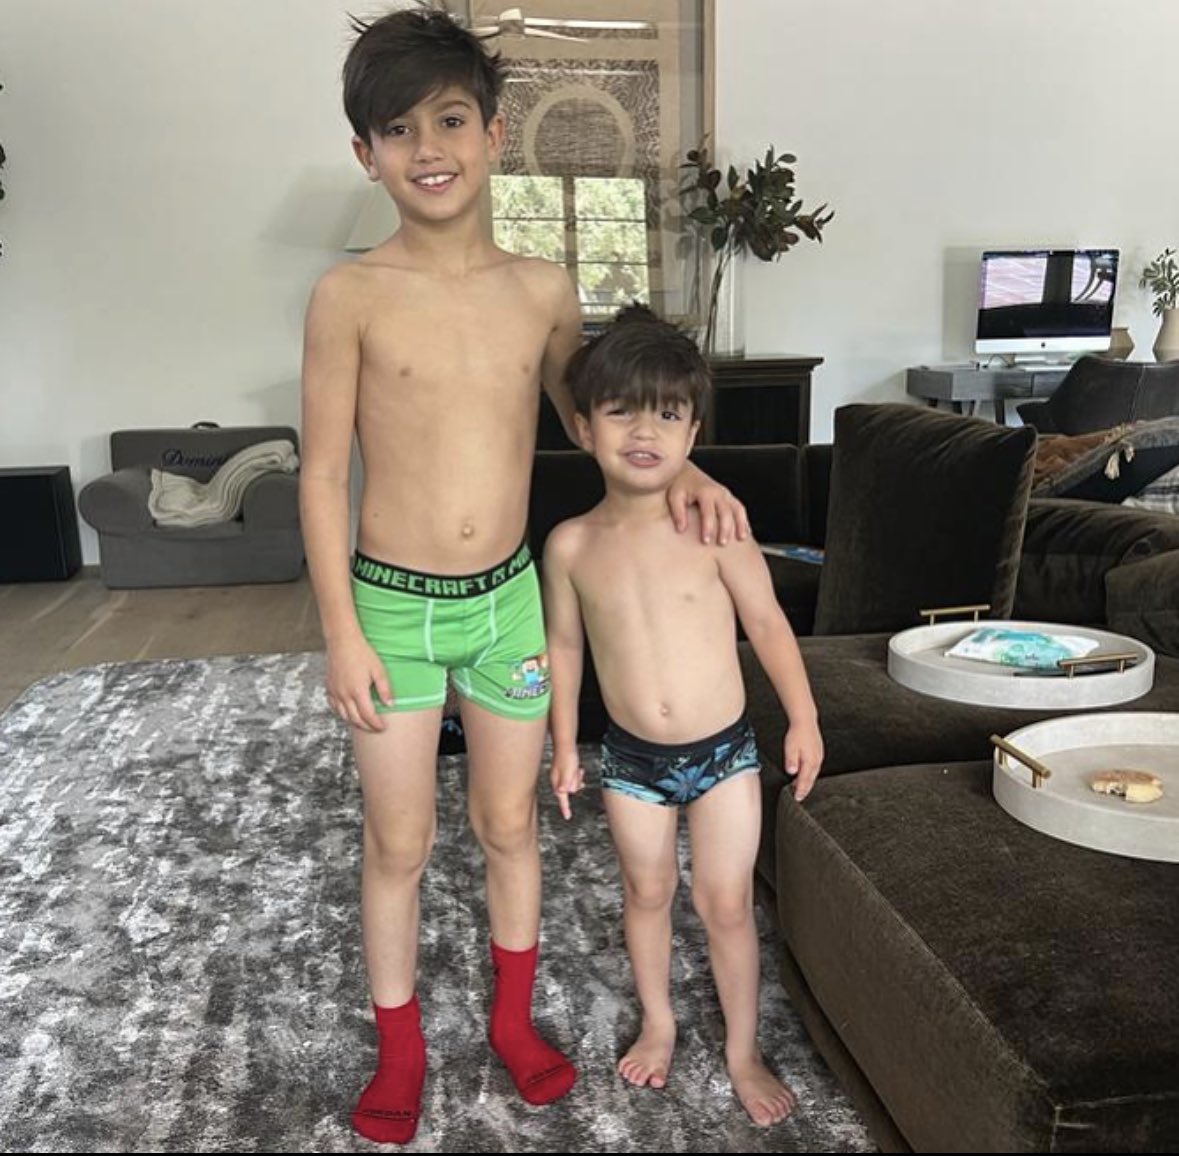 This is what I wake up to… These two little foos in their chonies & them scrappin!

#LopezBoys  #SundayMorning